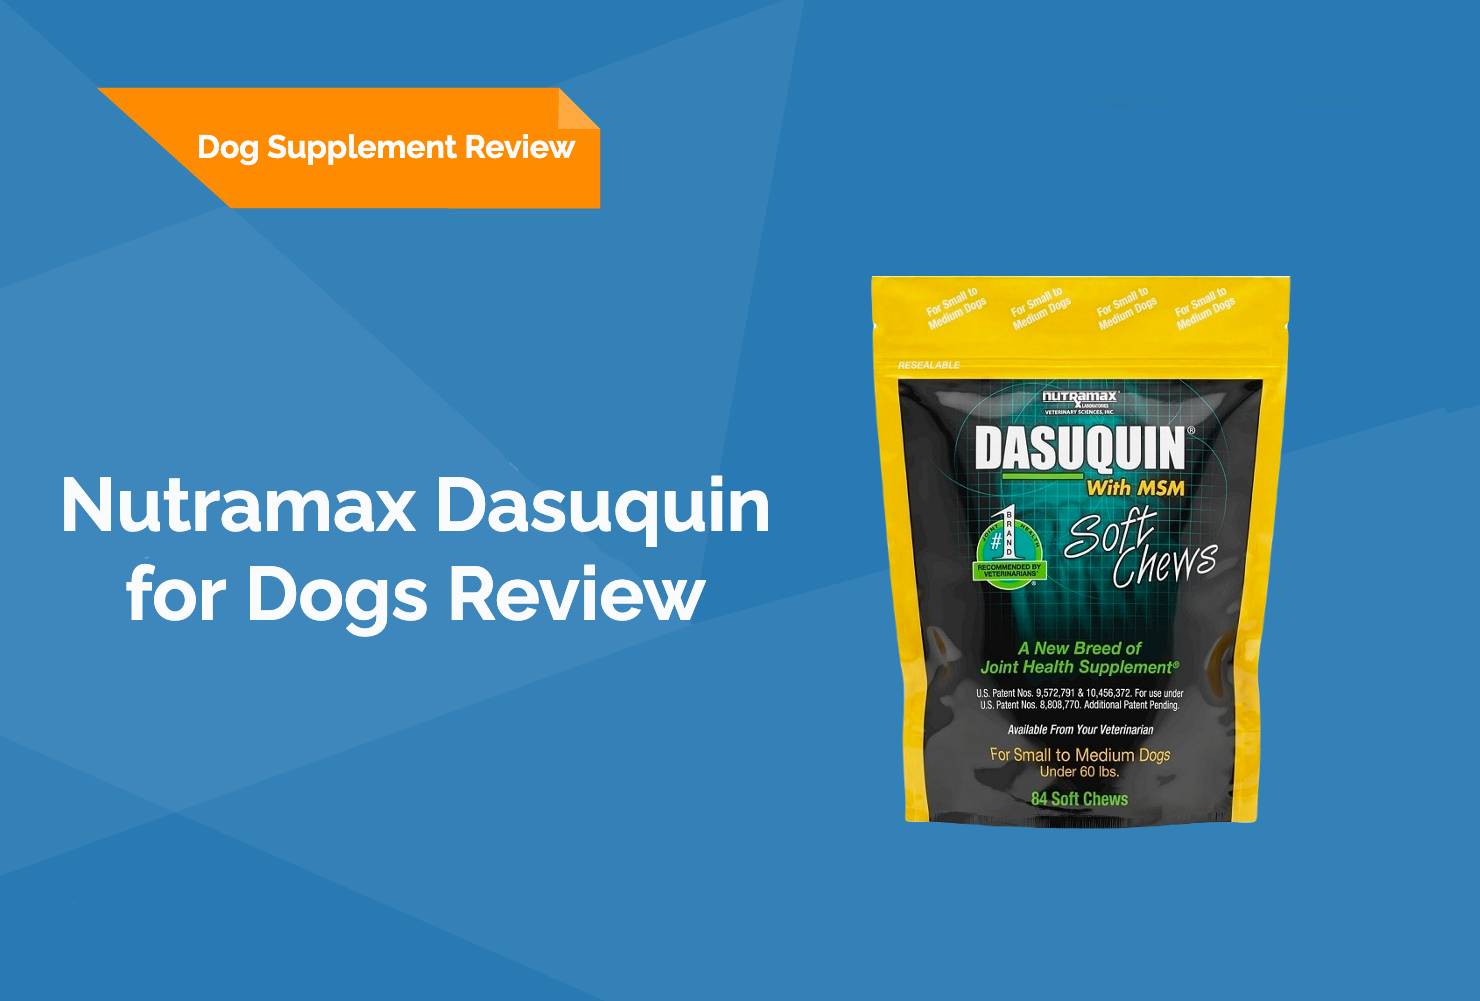 Nutramax Dasuquin for Dogs Review Featured Image